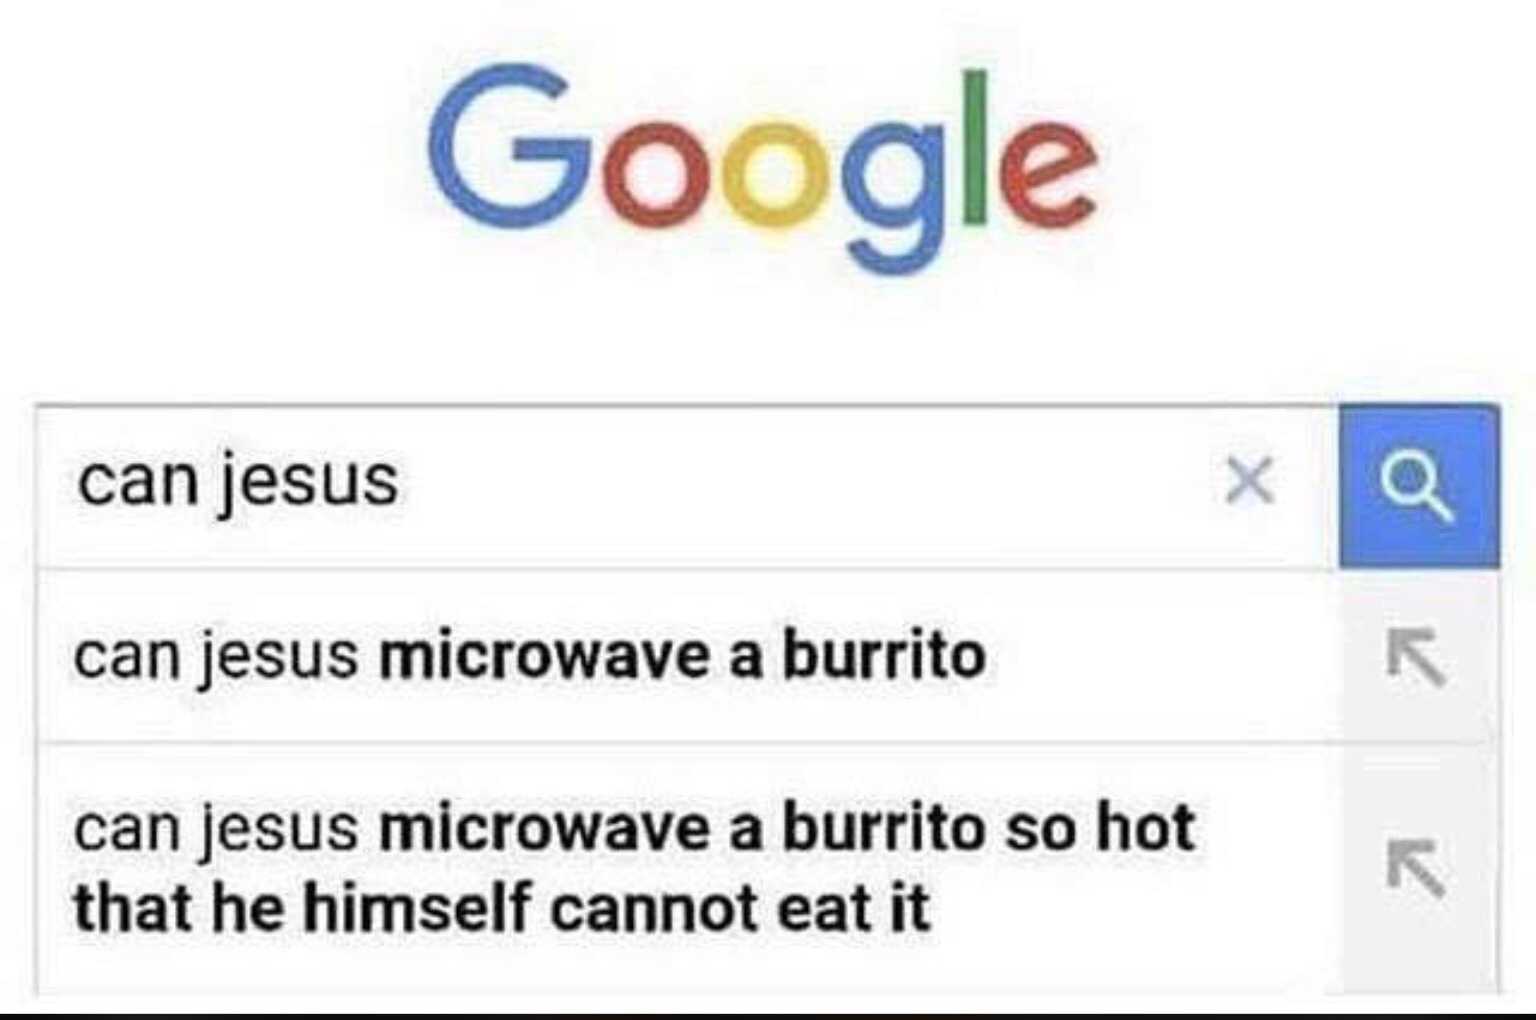 google - Google can jesus can jesus microwave a burrito can jesus microwave a burrito so hot that he himself cannot eat it